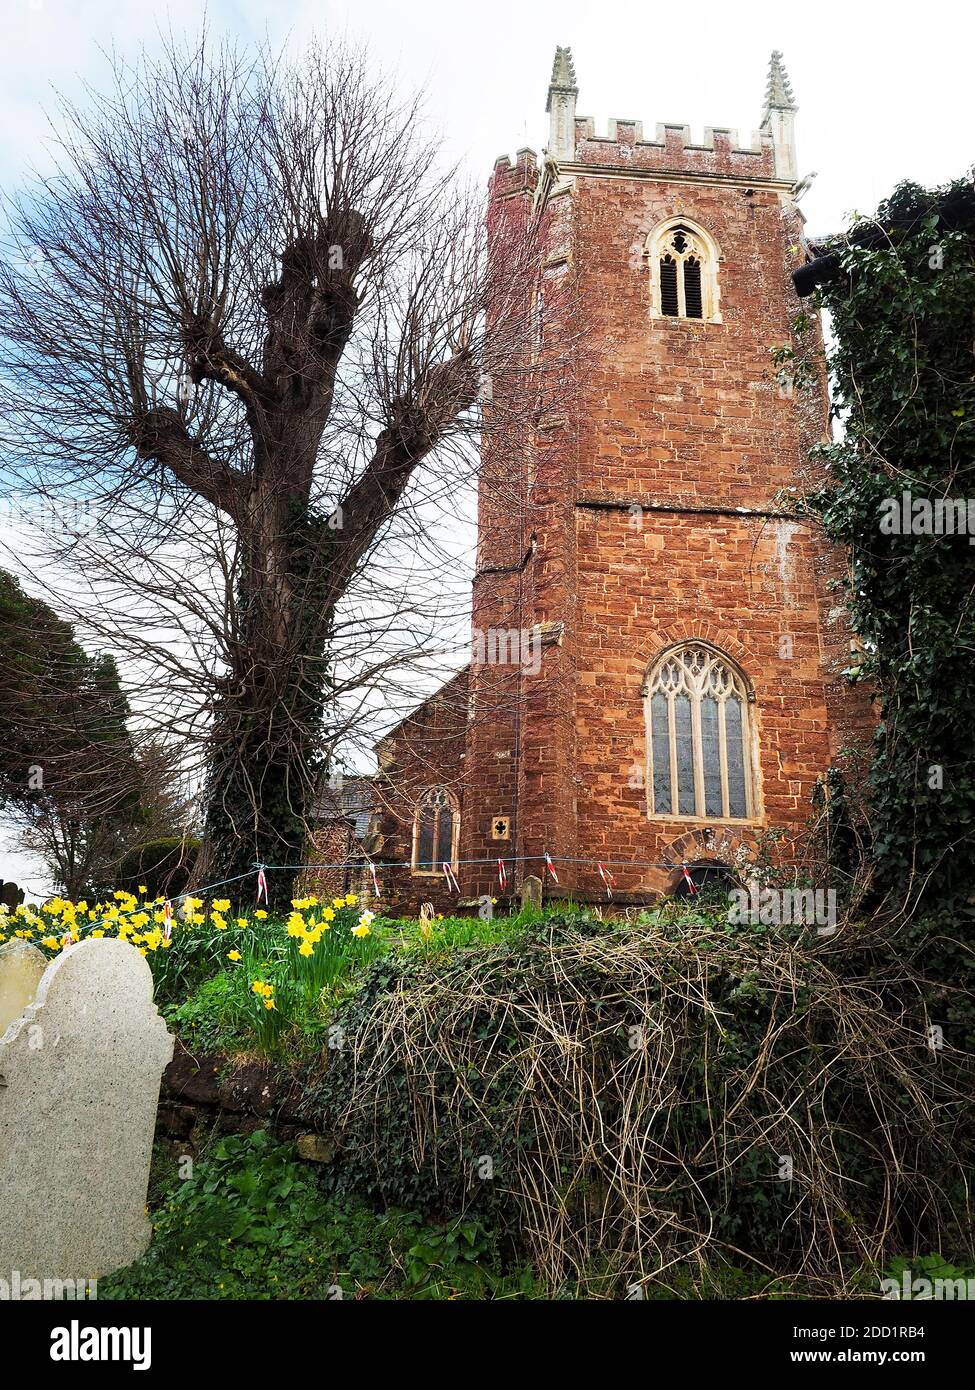 The church of St Michael and All Angels, Alphington is within a former manor and village, now a suburb of the City of Exeter in Devon. Stock Photo